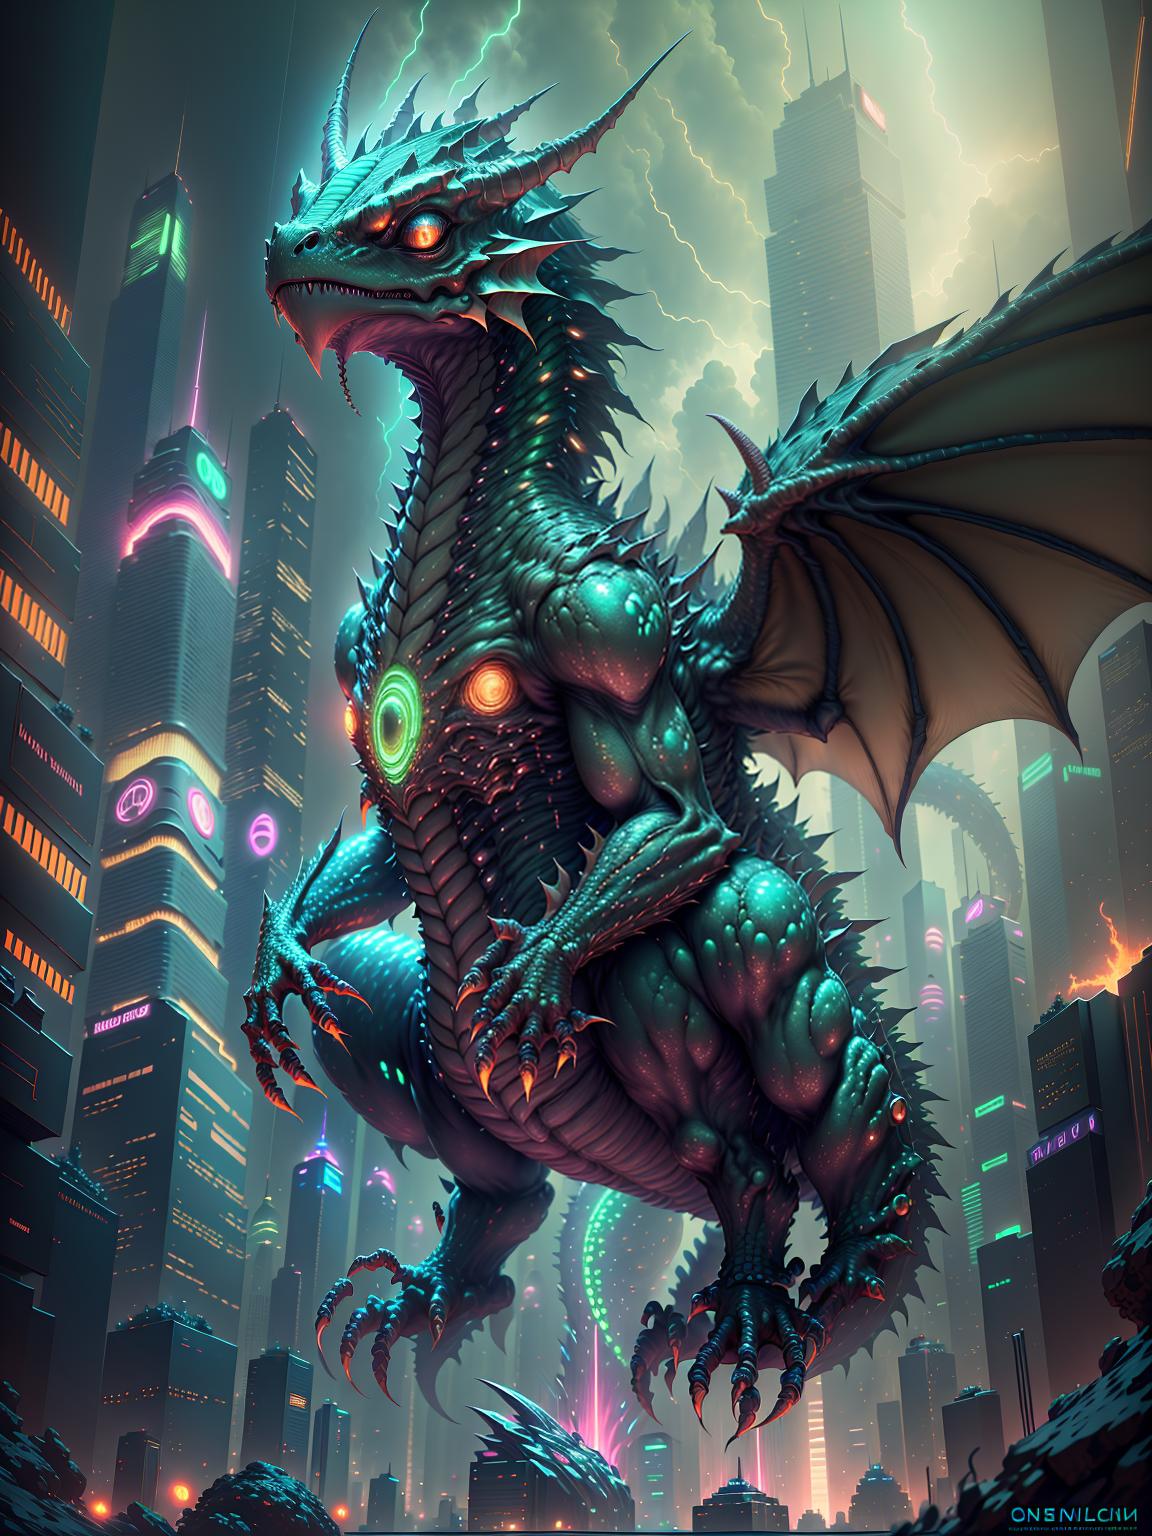  master piece, best quality, ultra detailed, highres, 4k.8k, Cyber Dragon, Emerging from the depths of a futuristic city, Majestic, BREAK A highly advanced civilization is facing the threat of a mechanized dragon., Futuristic cityscape, Skyscrapers, holographic billboards, flying vehicles, BREAK Futuristic and ominous, Sleek metallic scales, glowing energy engines, and neon lit surroundings., creature00d,Cu73Cre4ture